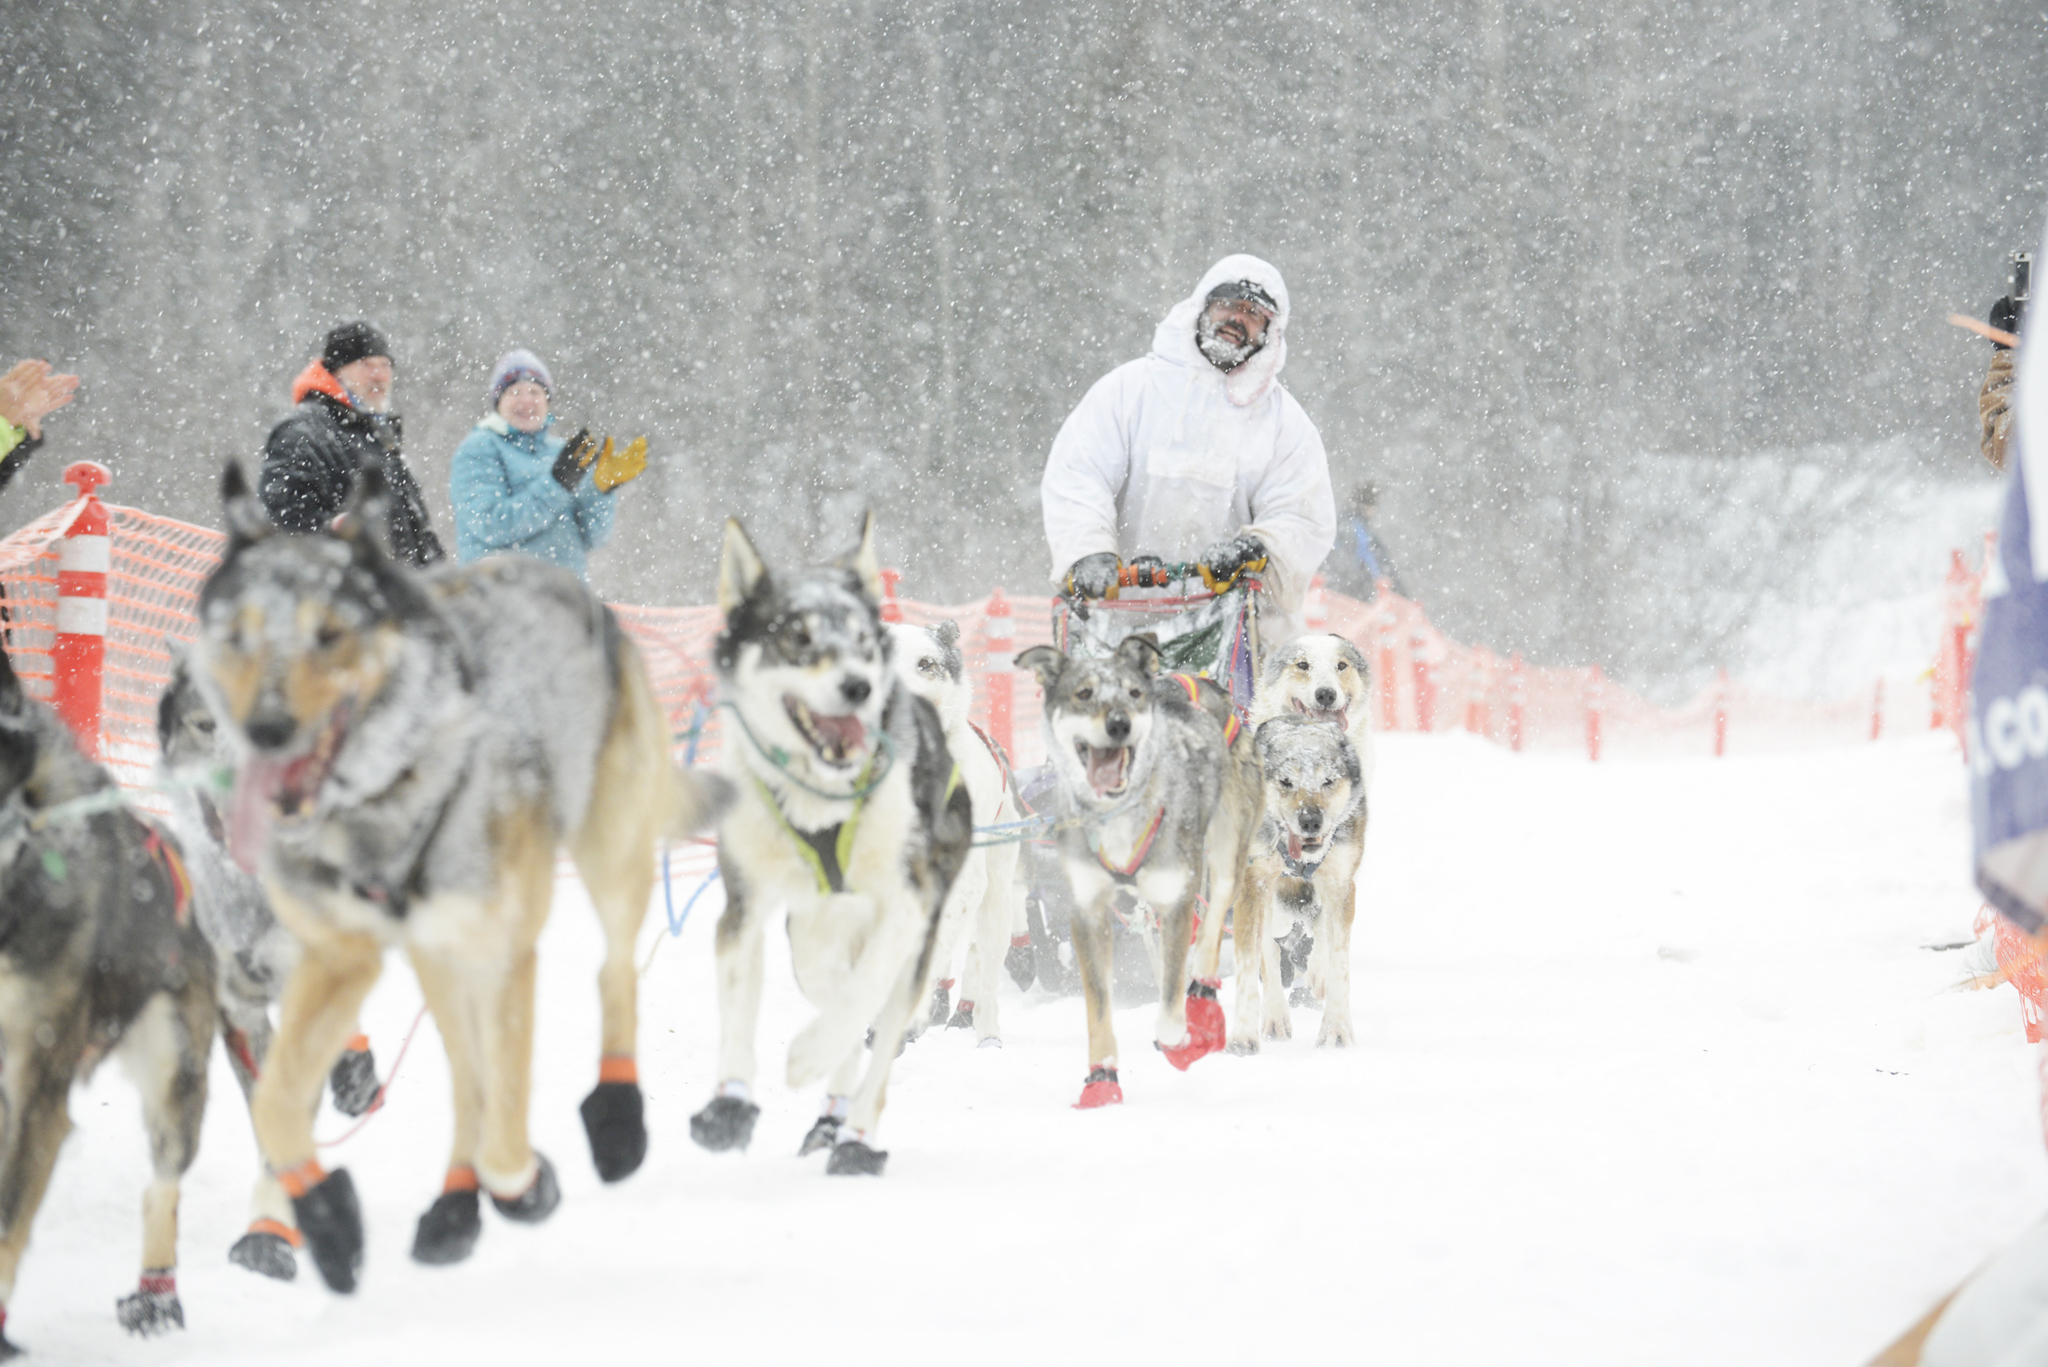 Big Lake musher Cim Smyth nears the finish line of the Tustumena 200 Sled Dog Race with his team Sunday, Jan. 29, 2017 in Kasilof, Alaska. Smyth claimed his fourth T200 win, completing the race through the Caribou Hills in just over 26 hours. (Megan Pacer/Peninsula Clarion)